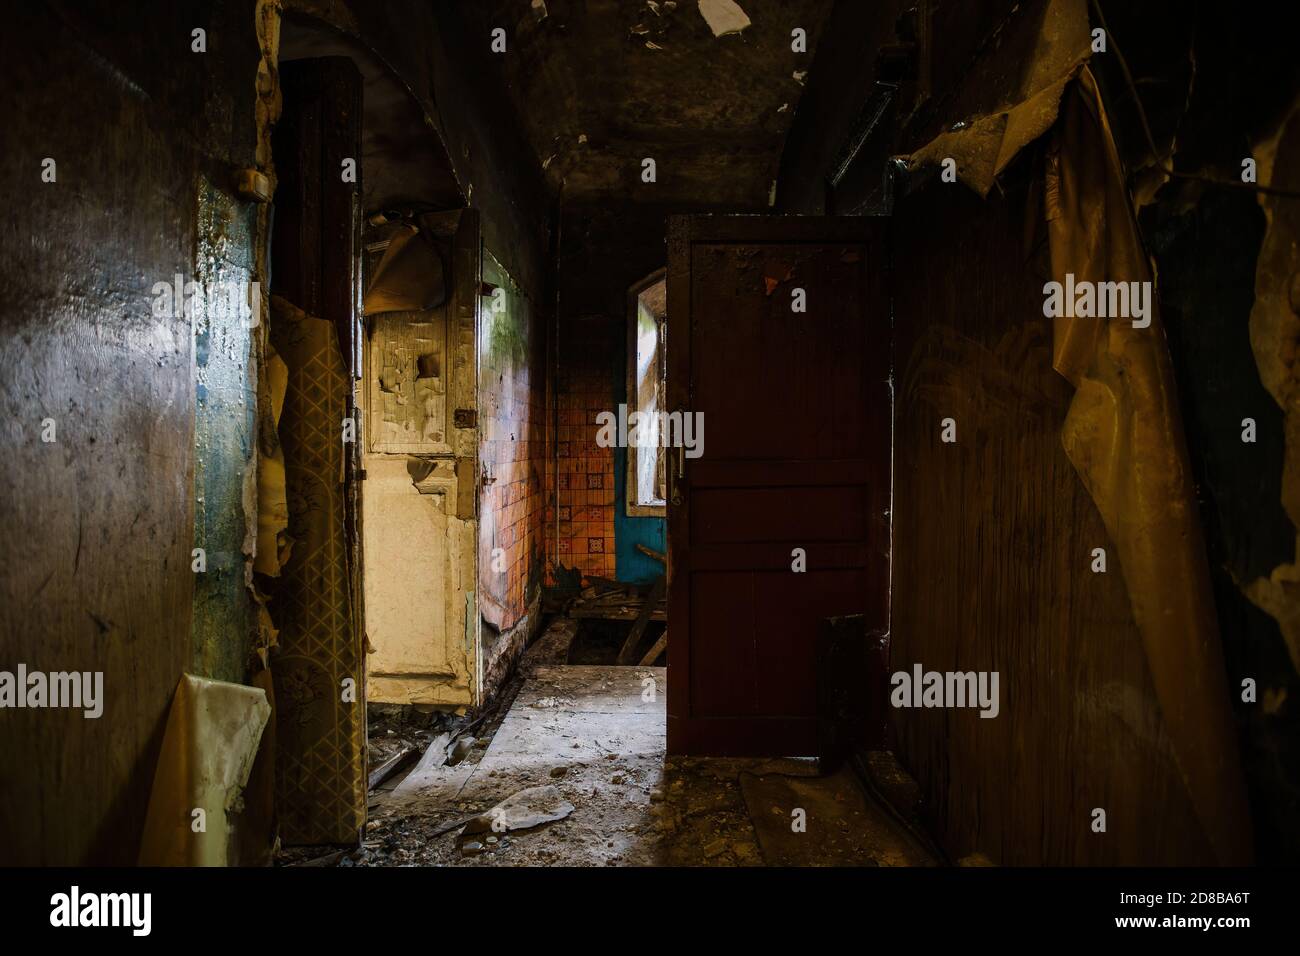 Burnt old house interior. Consequences of fire Stock Photo